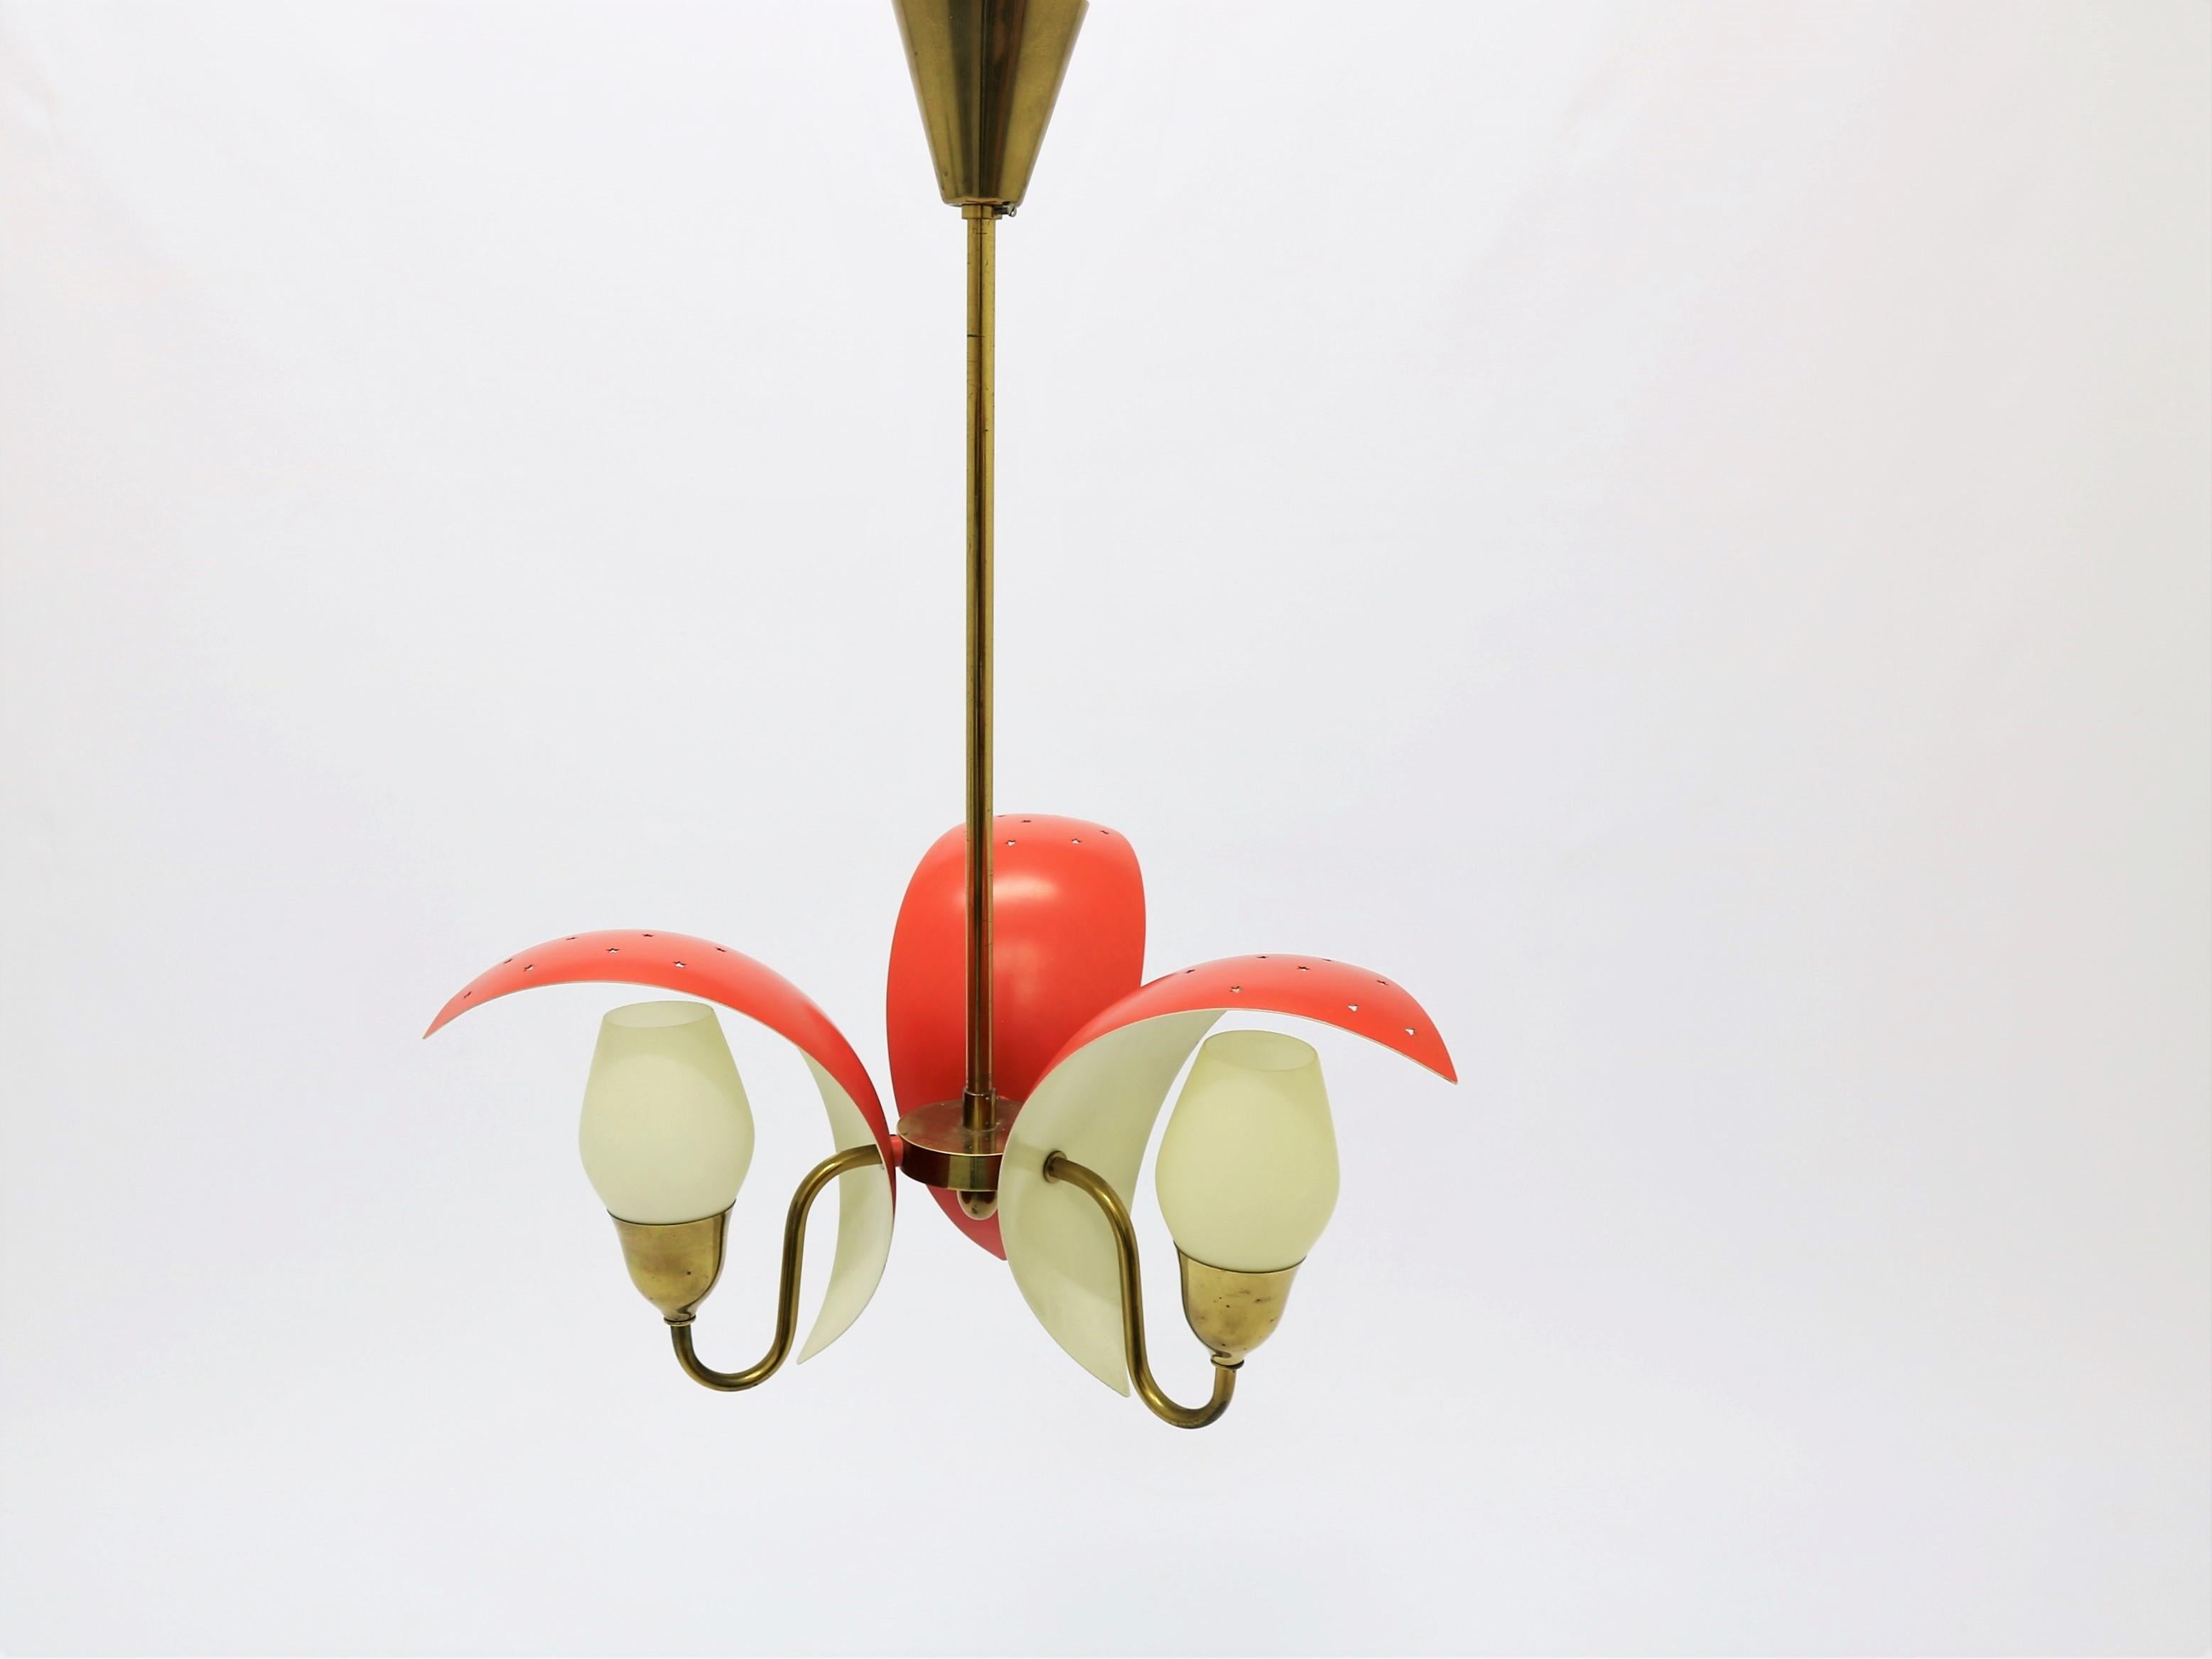 Beautiful Art Deco chandelier in brass, opal glass and red painted metal. Made in Denmark by Fog & Mørup in the 1940s and sometimes ascribed to famous Danish designer Bent Karlby.